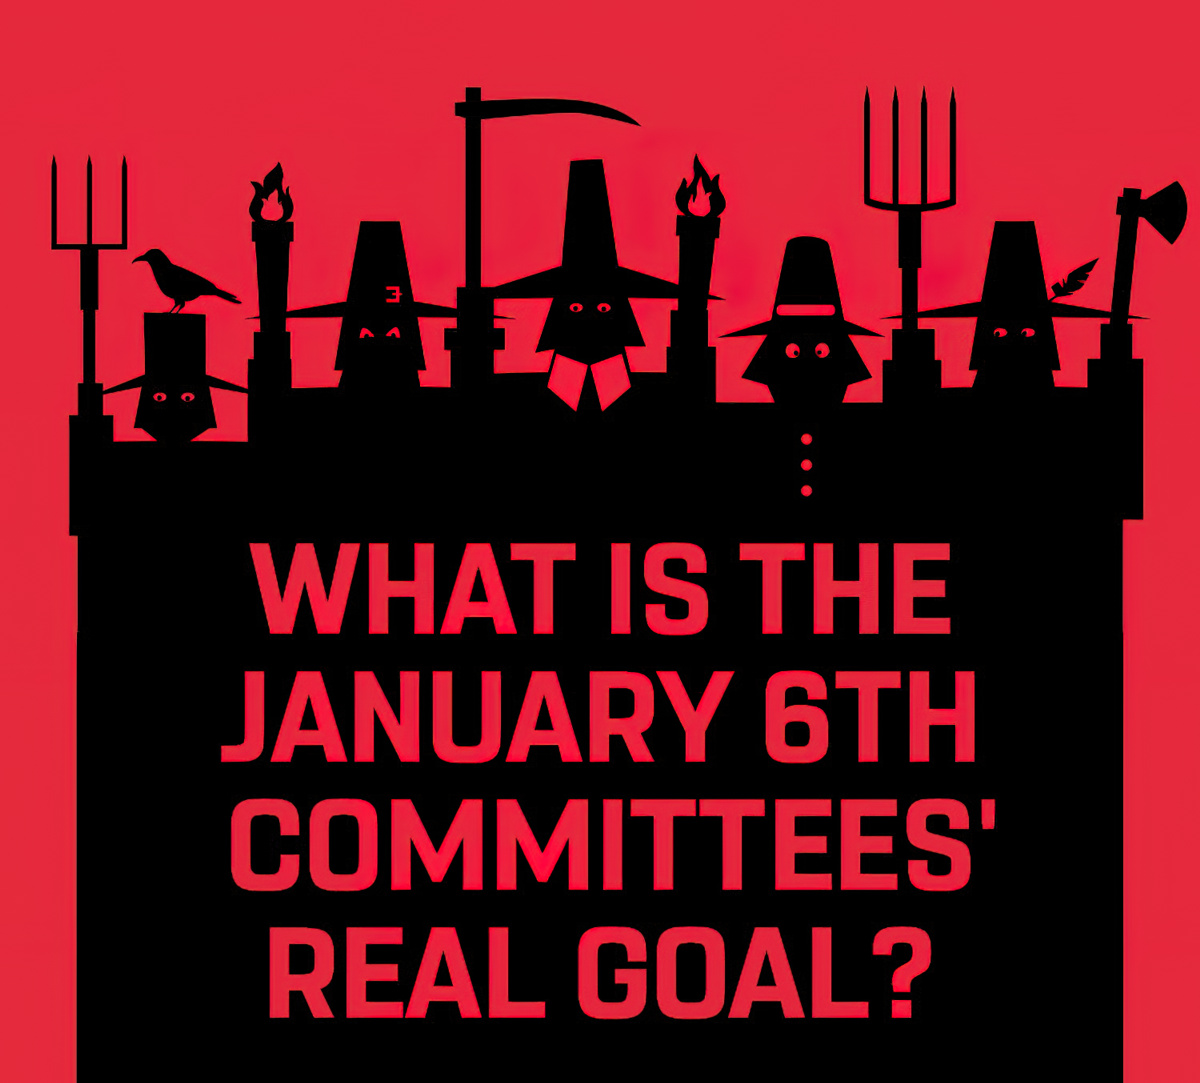 QFD Poll - What Is The January 6th Committees' Real Goal?